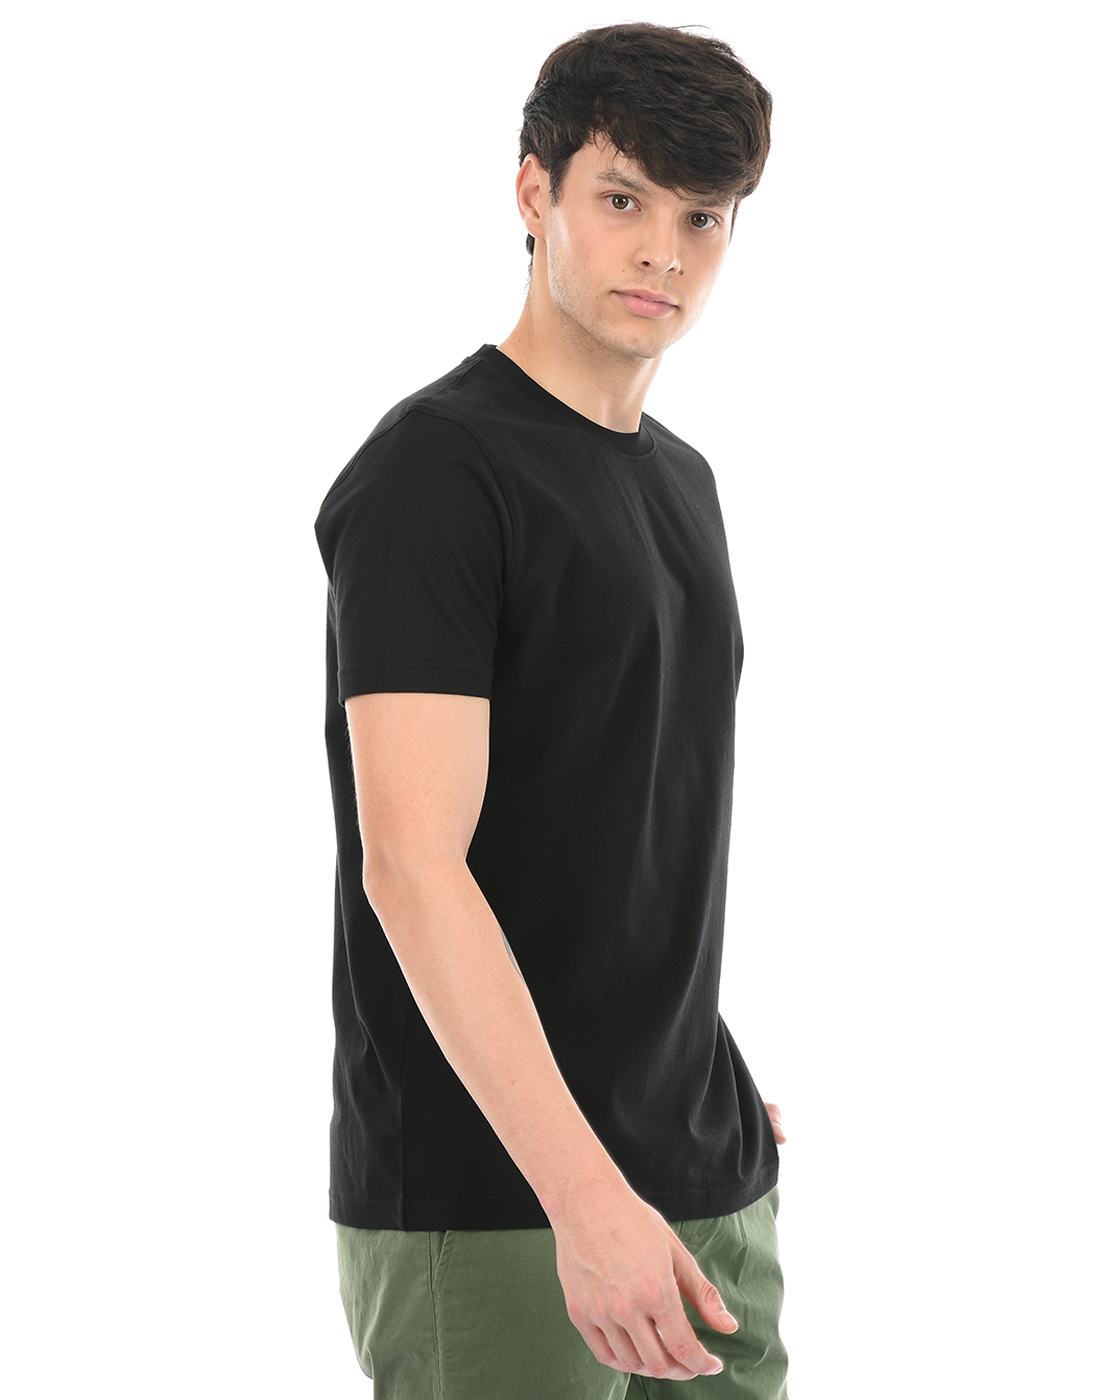 ONEWAY Round Neck Half Sleeves Solid T-Shirt for Men|100% Cotton|Regular Fit|Men's Stretchable T-Shirt|Casual Westernwear